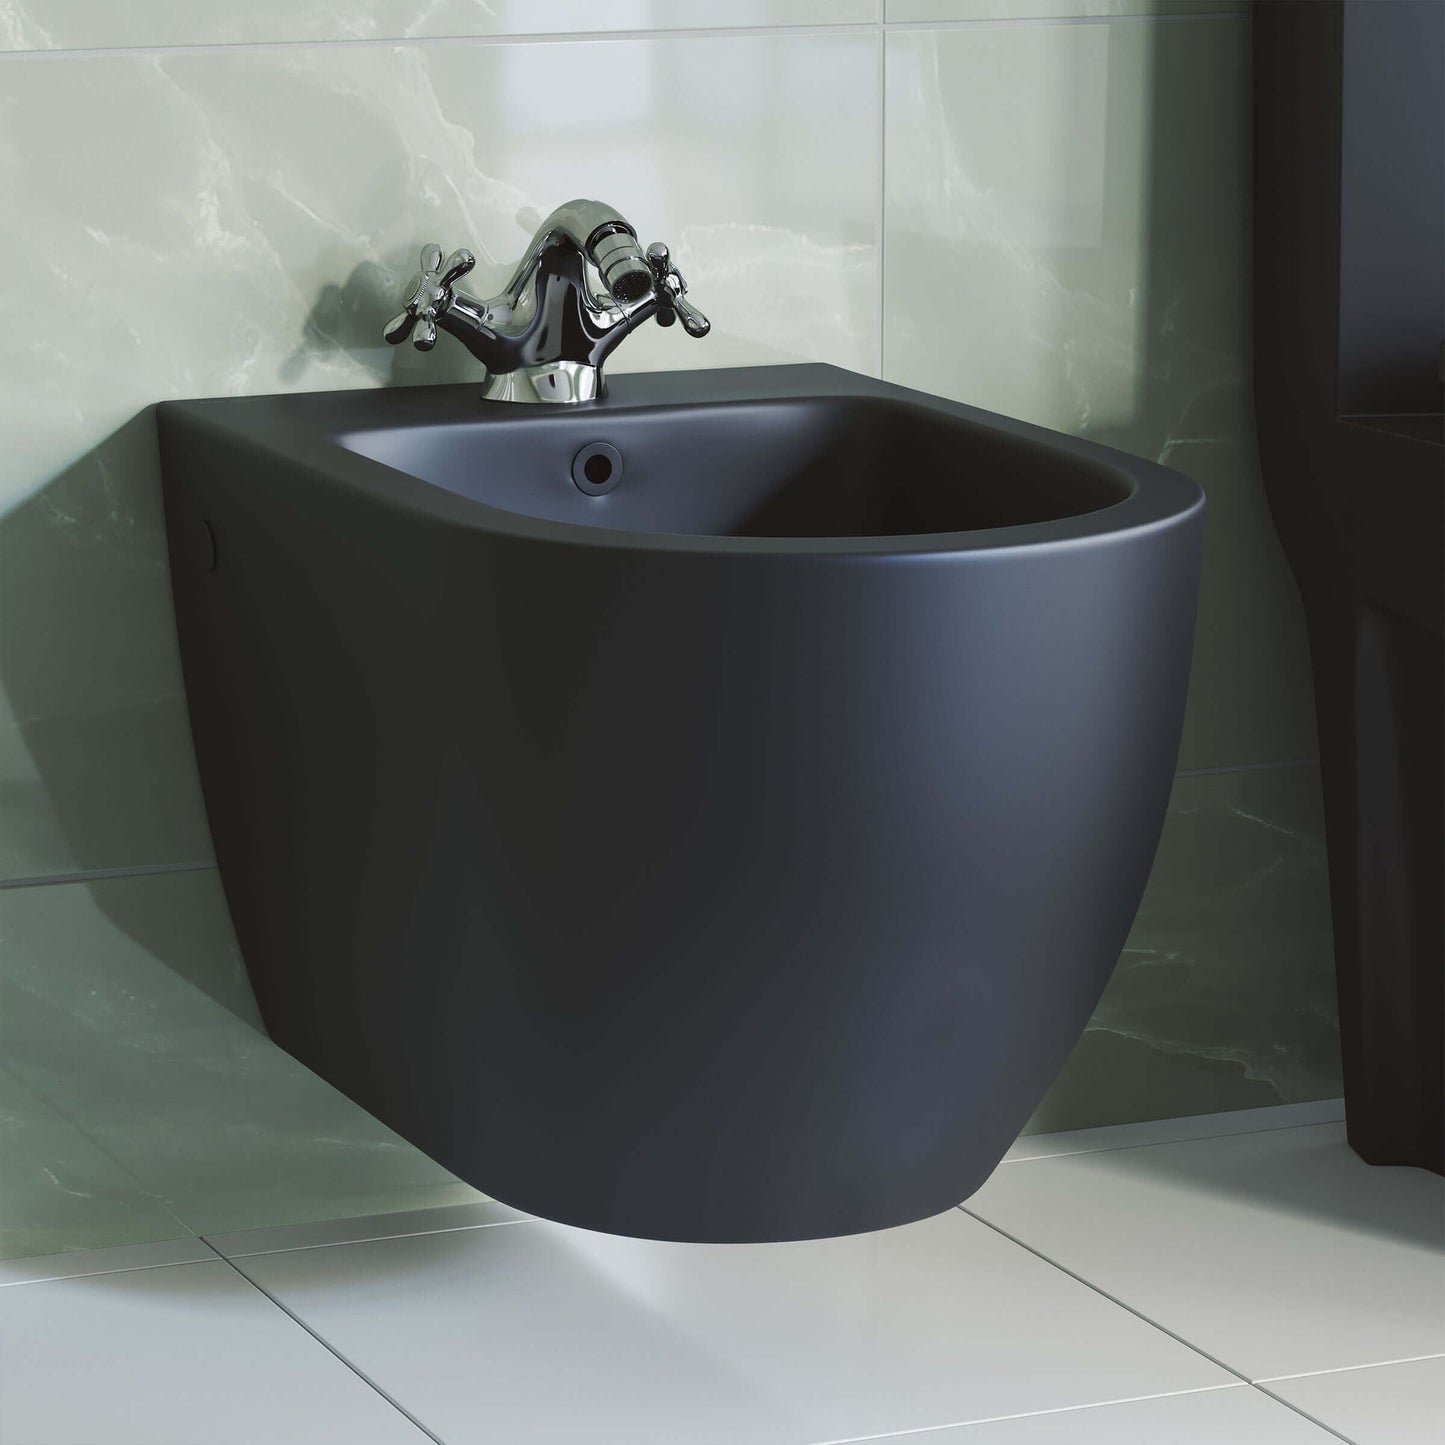 St. Tropez Wall Hung Bidet - side angled view in a bathroom in color black